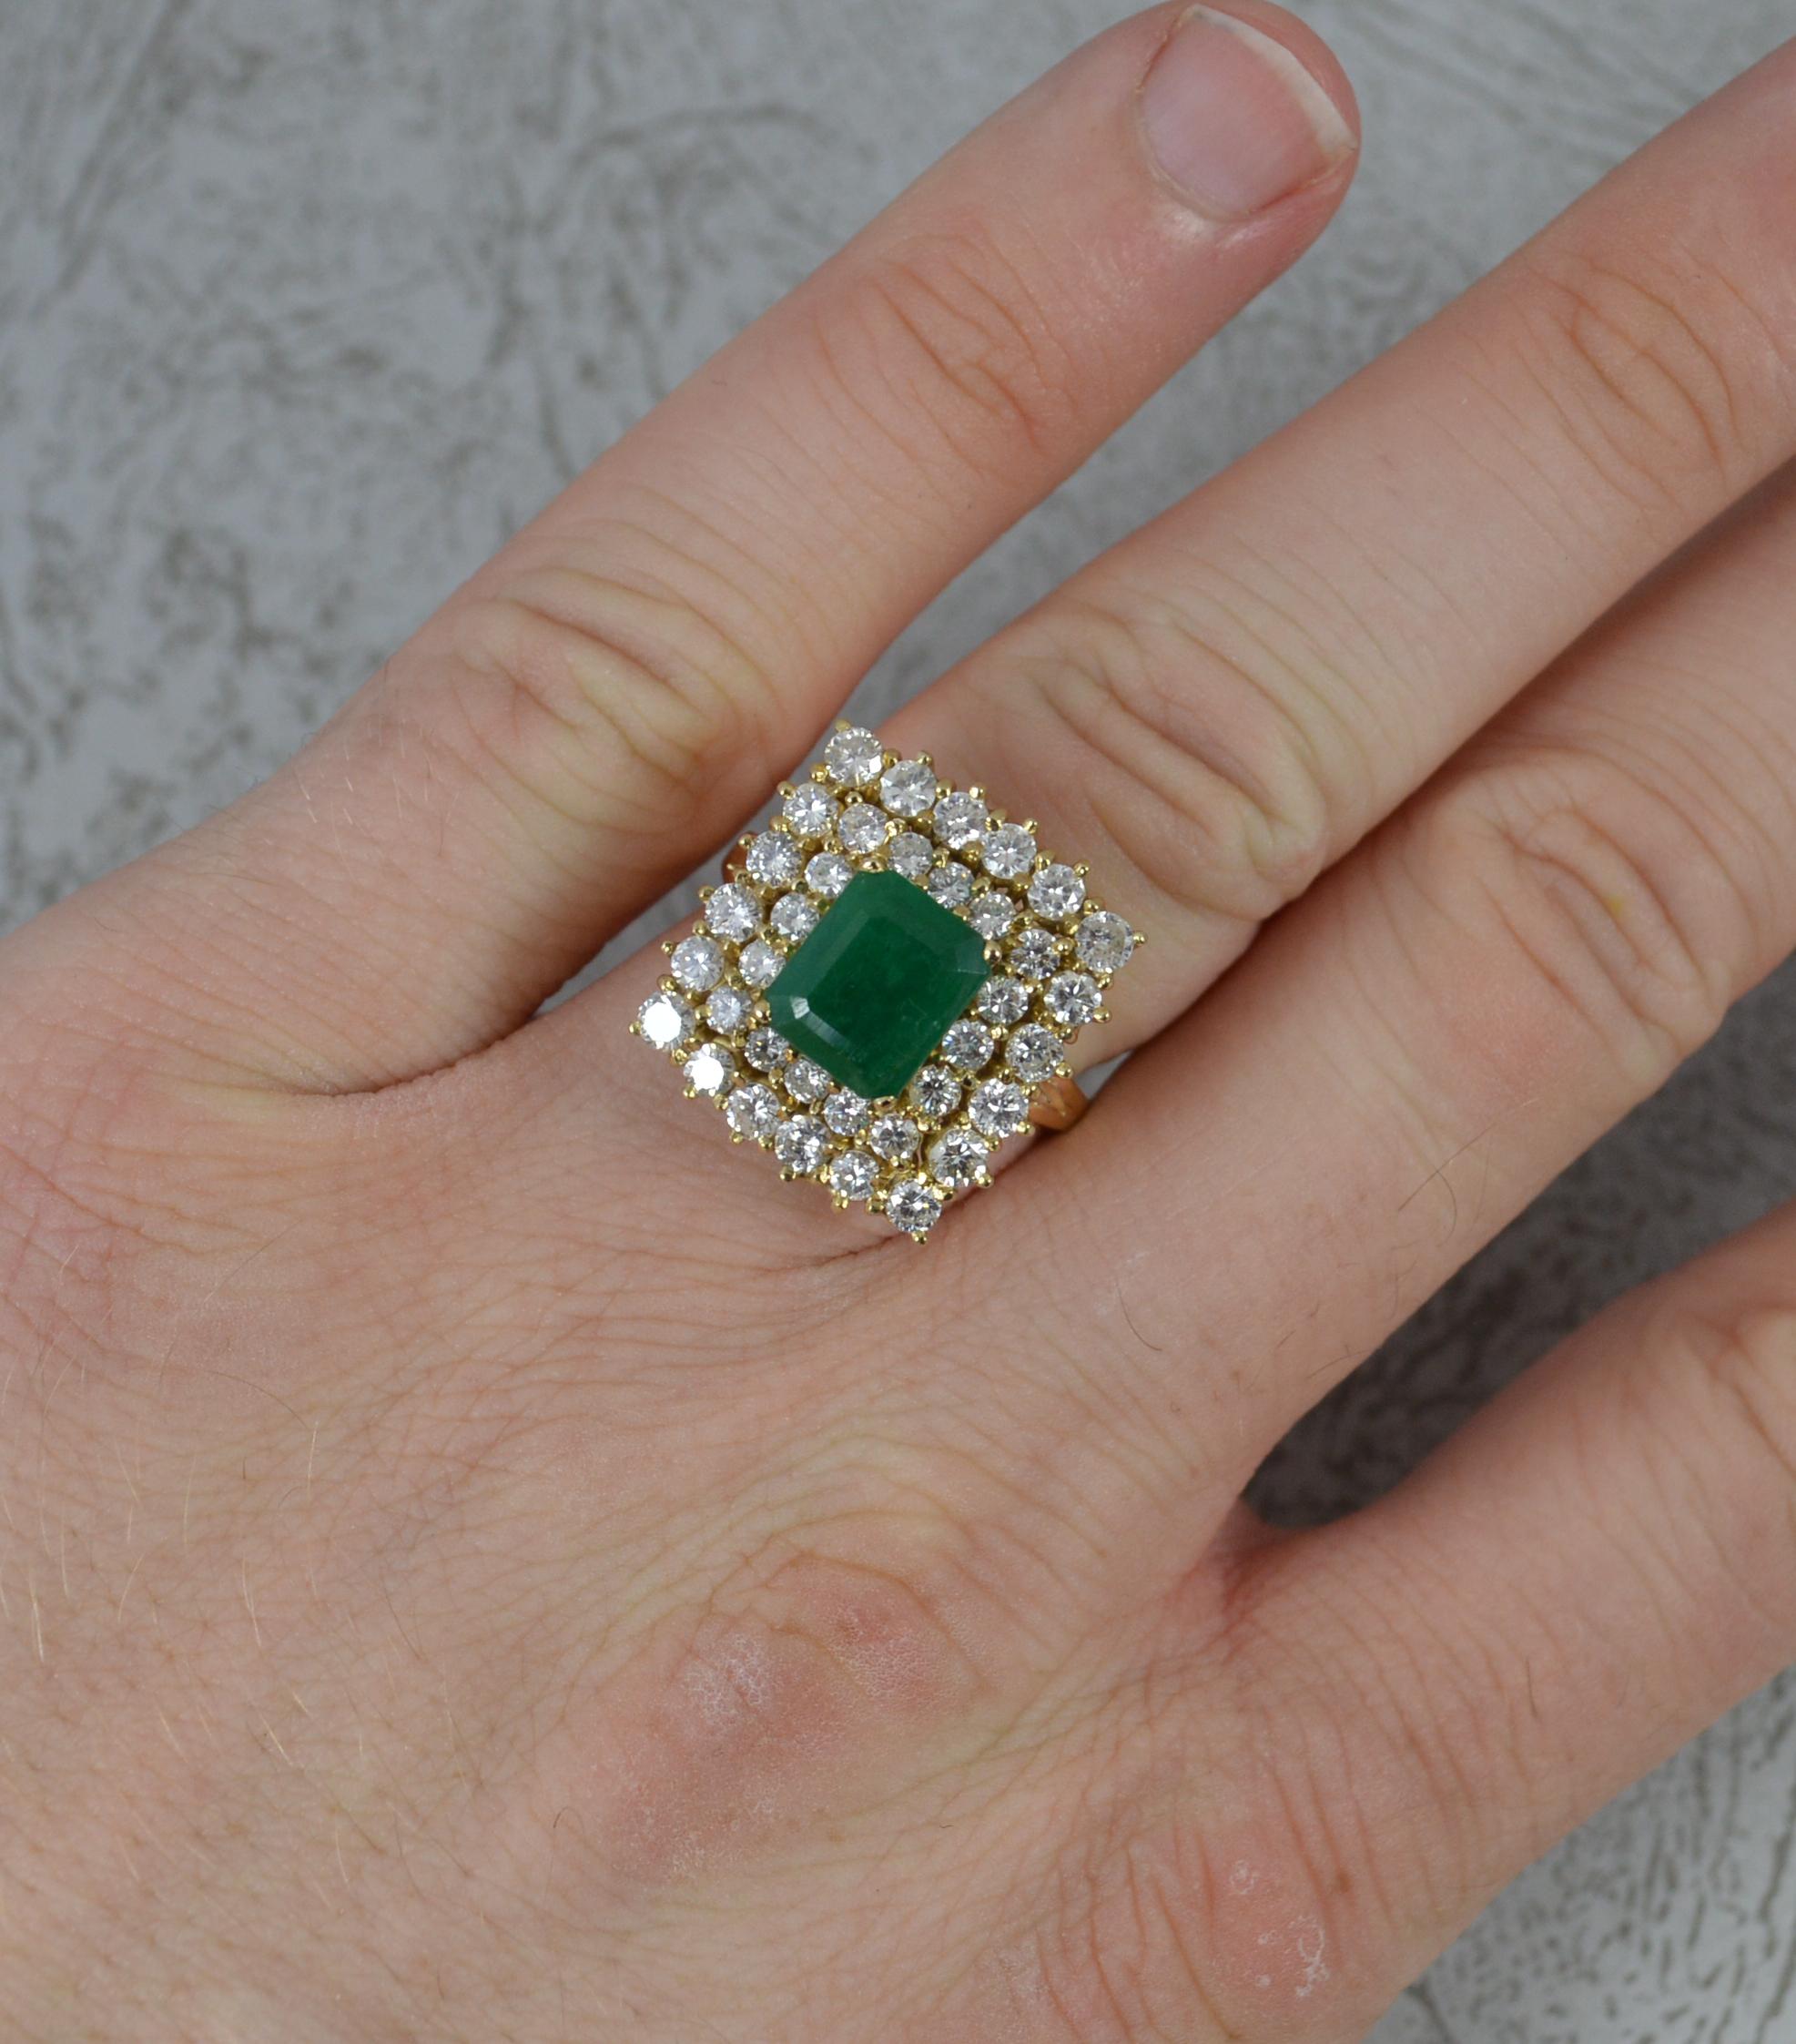 A superb emerald and diamond ring.
Solid 18 carat yellow gold example.
Designed with an emerald cut emerald to the centre, 8.2mm x 6.8mm in a four claw setting. Surrounding is a double row of round brilliant cut diamonds to total 1.50 carats. Very